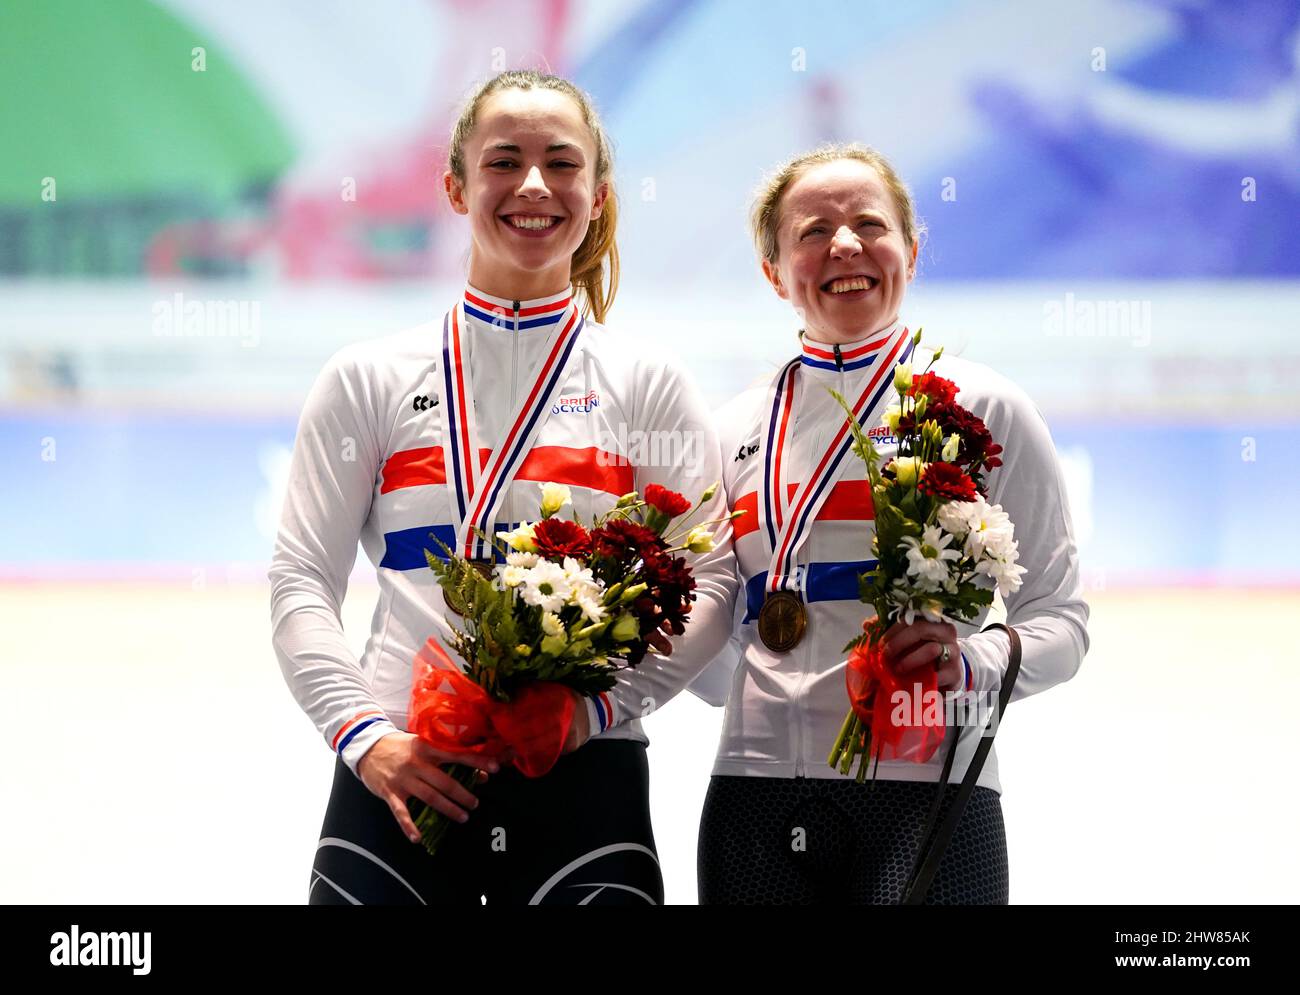 Lora Fachie MBE (right) and pilot Georgia Holt celebrate with their medals after winning the Tandem Sprint Championship during day two of the HSBC UK National Track Championships at the Geraint Thomas National Velodrome, Newport. Stock Photo